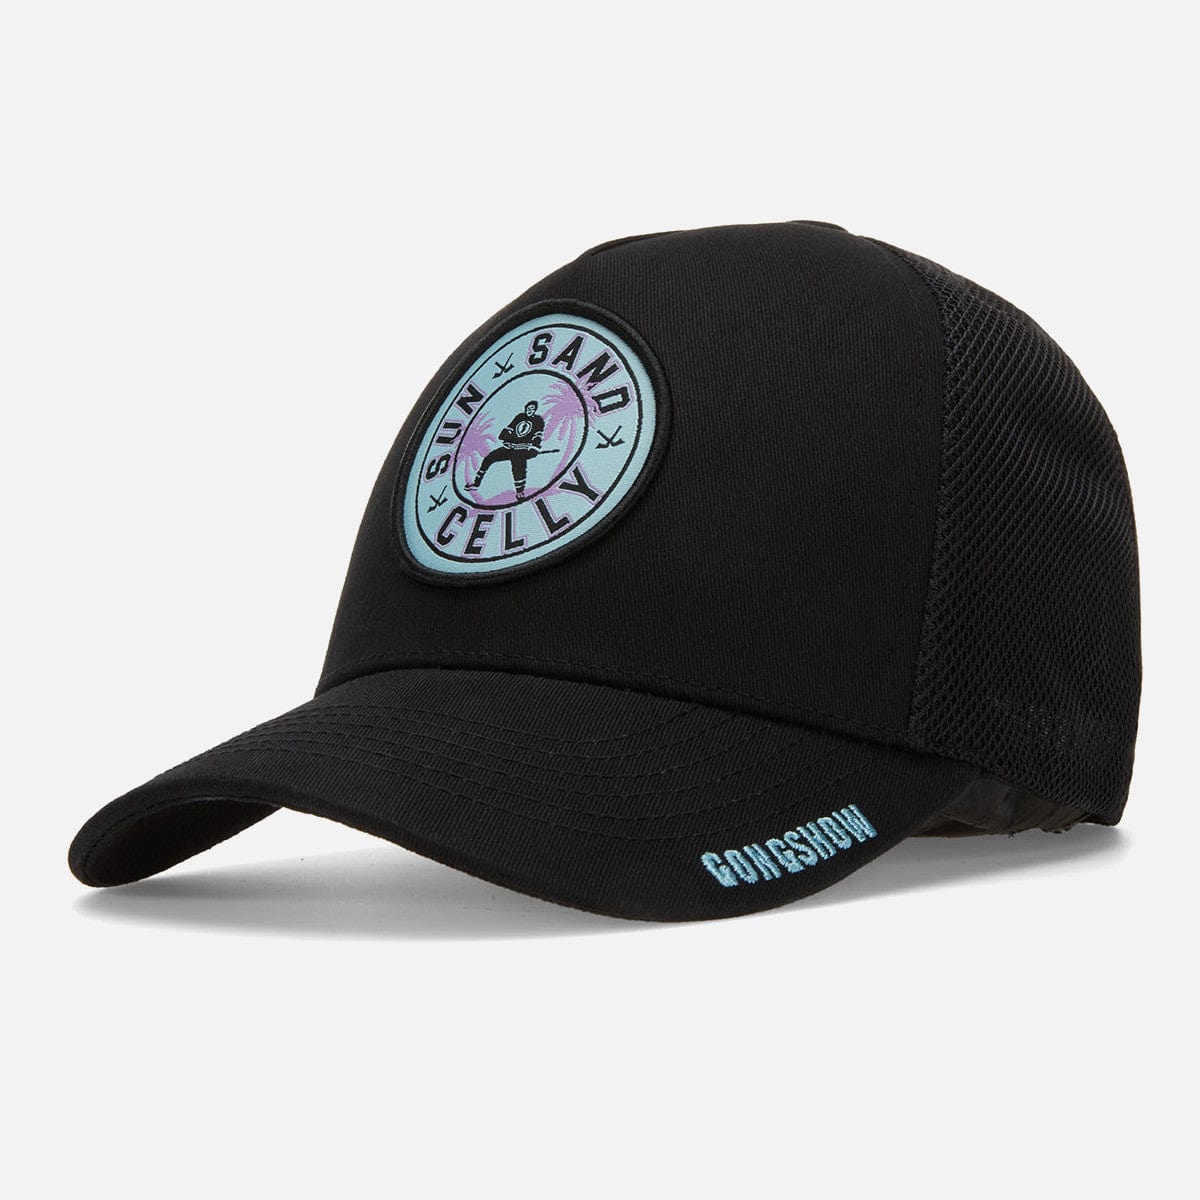 Gongshow Hockey Sun Down Celly Up Snapback Hat